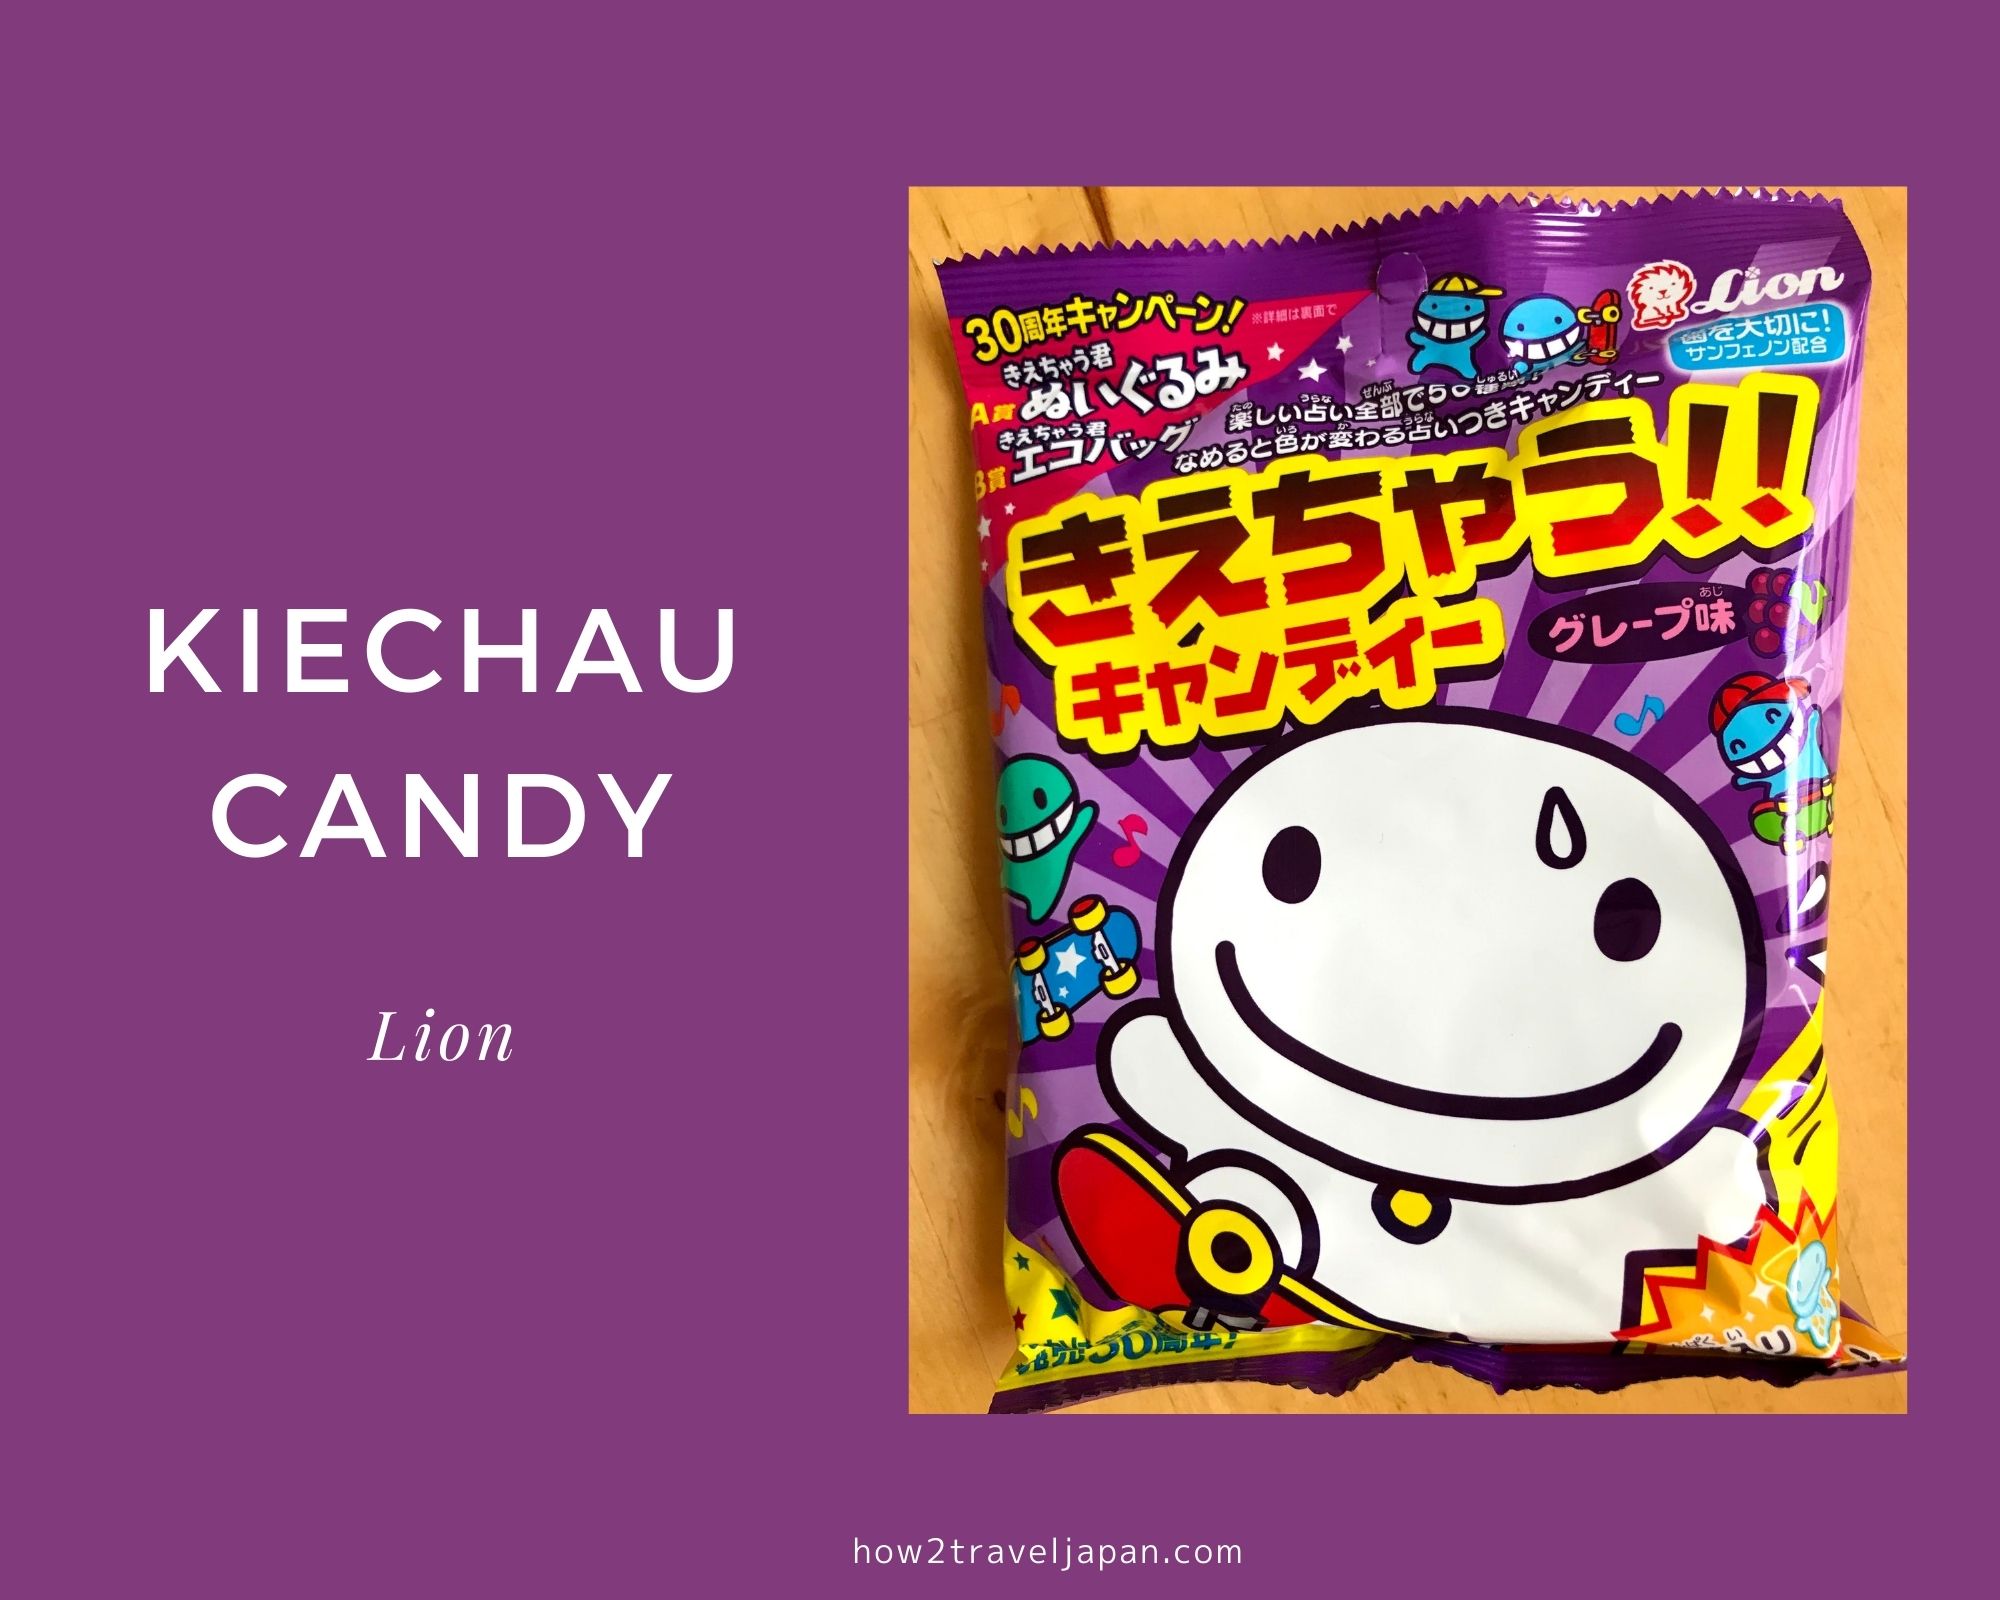 You are currently viewing 30th anniversary【kiechau candy】vanished candy, from Lion